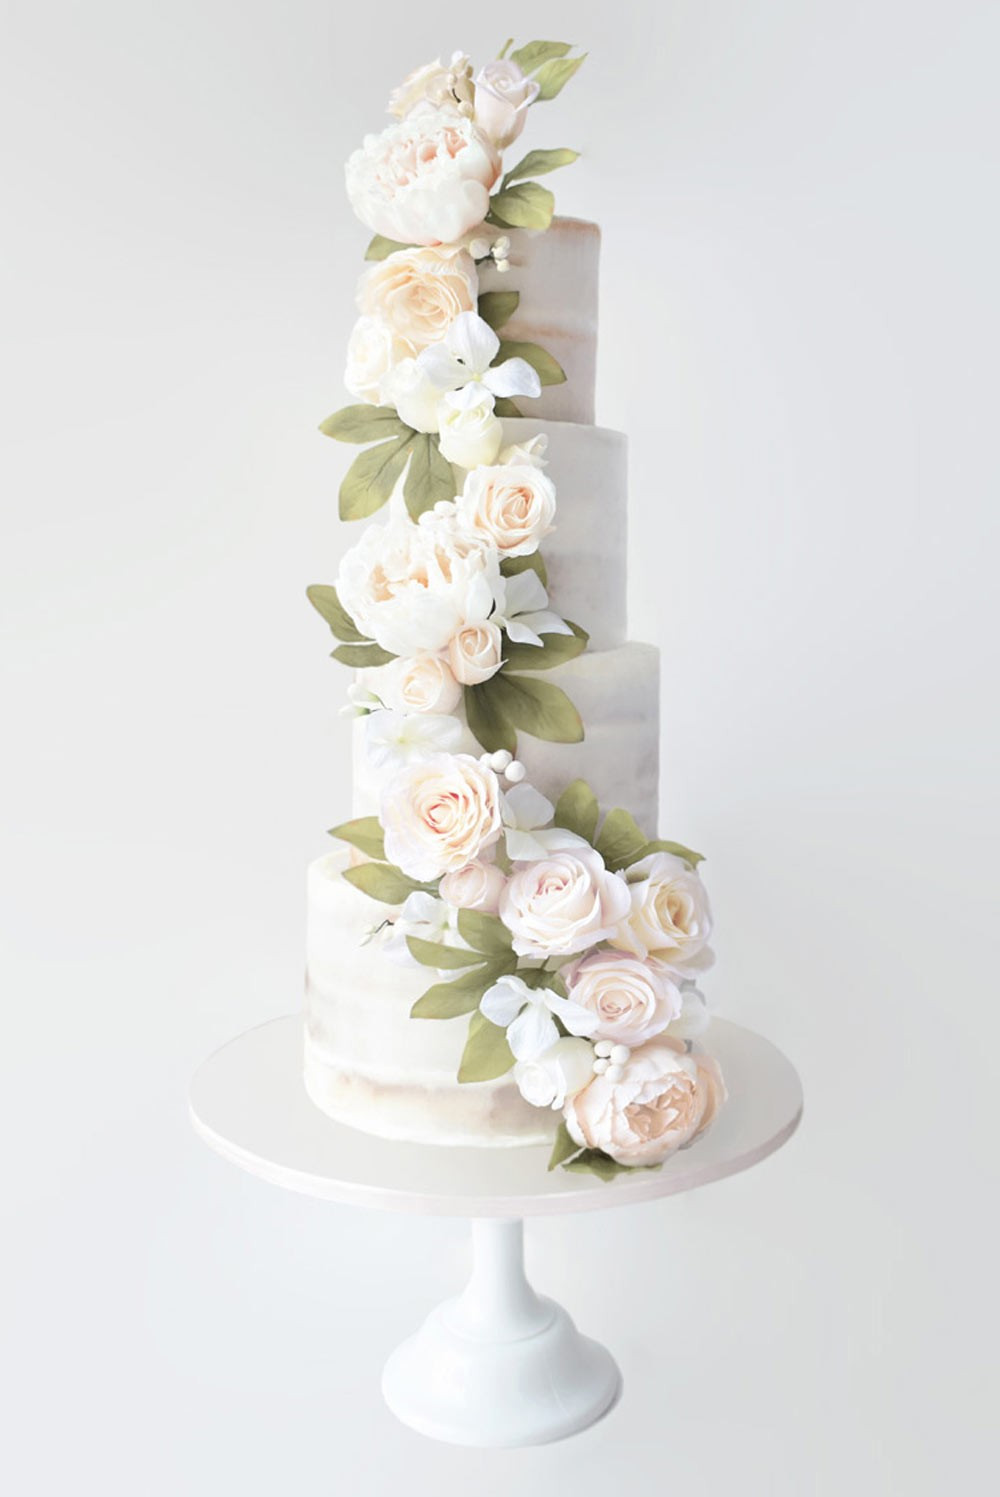 Price Of Wedding Cakes
 Wedding Cake Prices Guide for bud s from £100 to over £